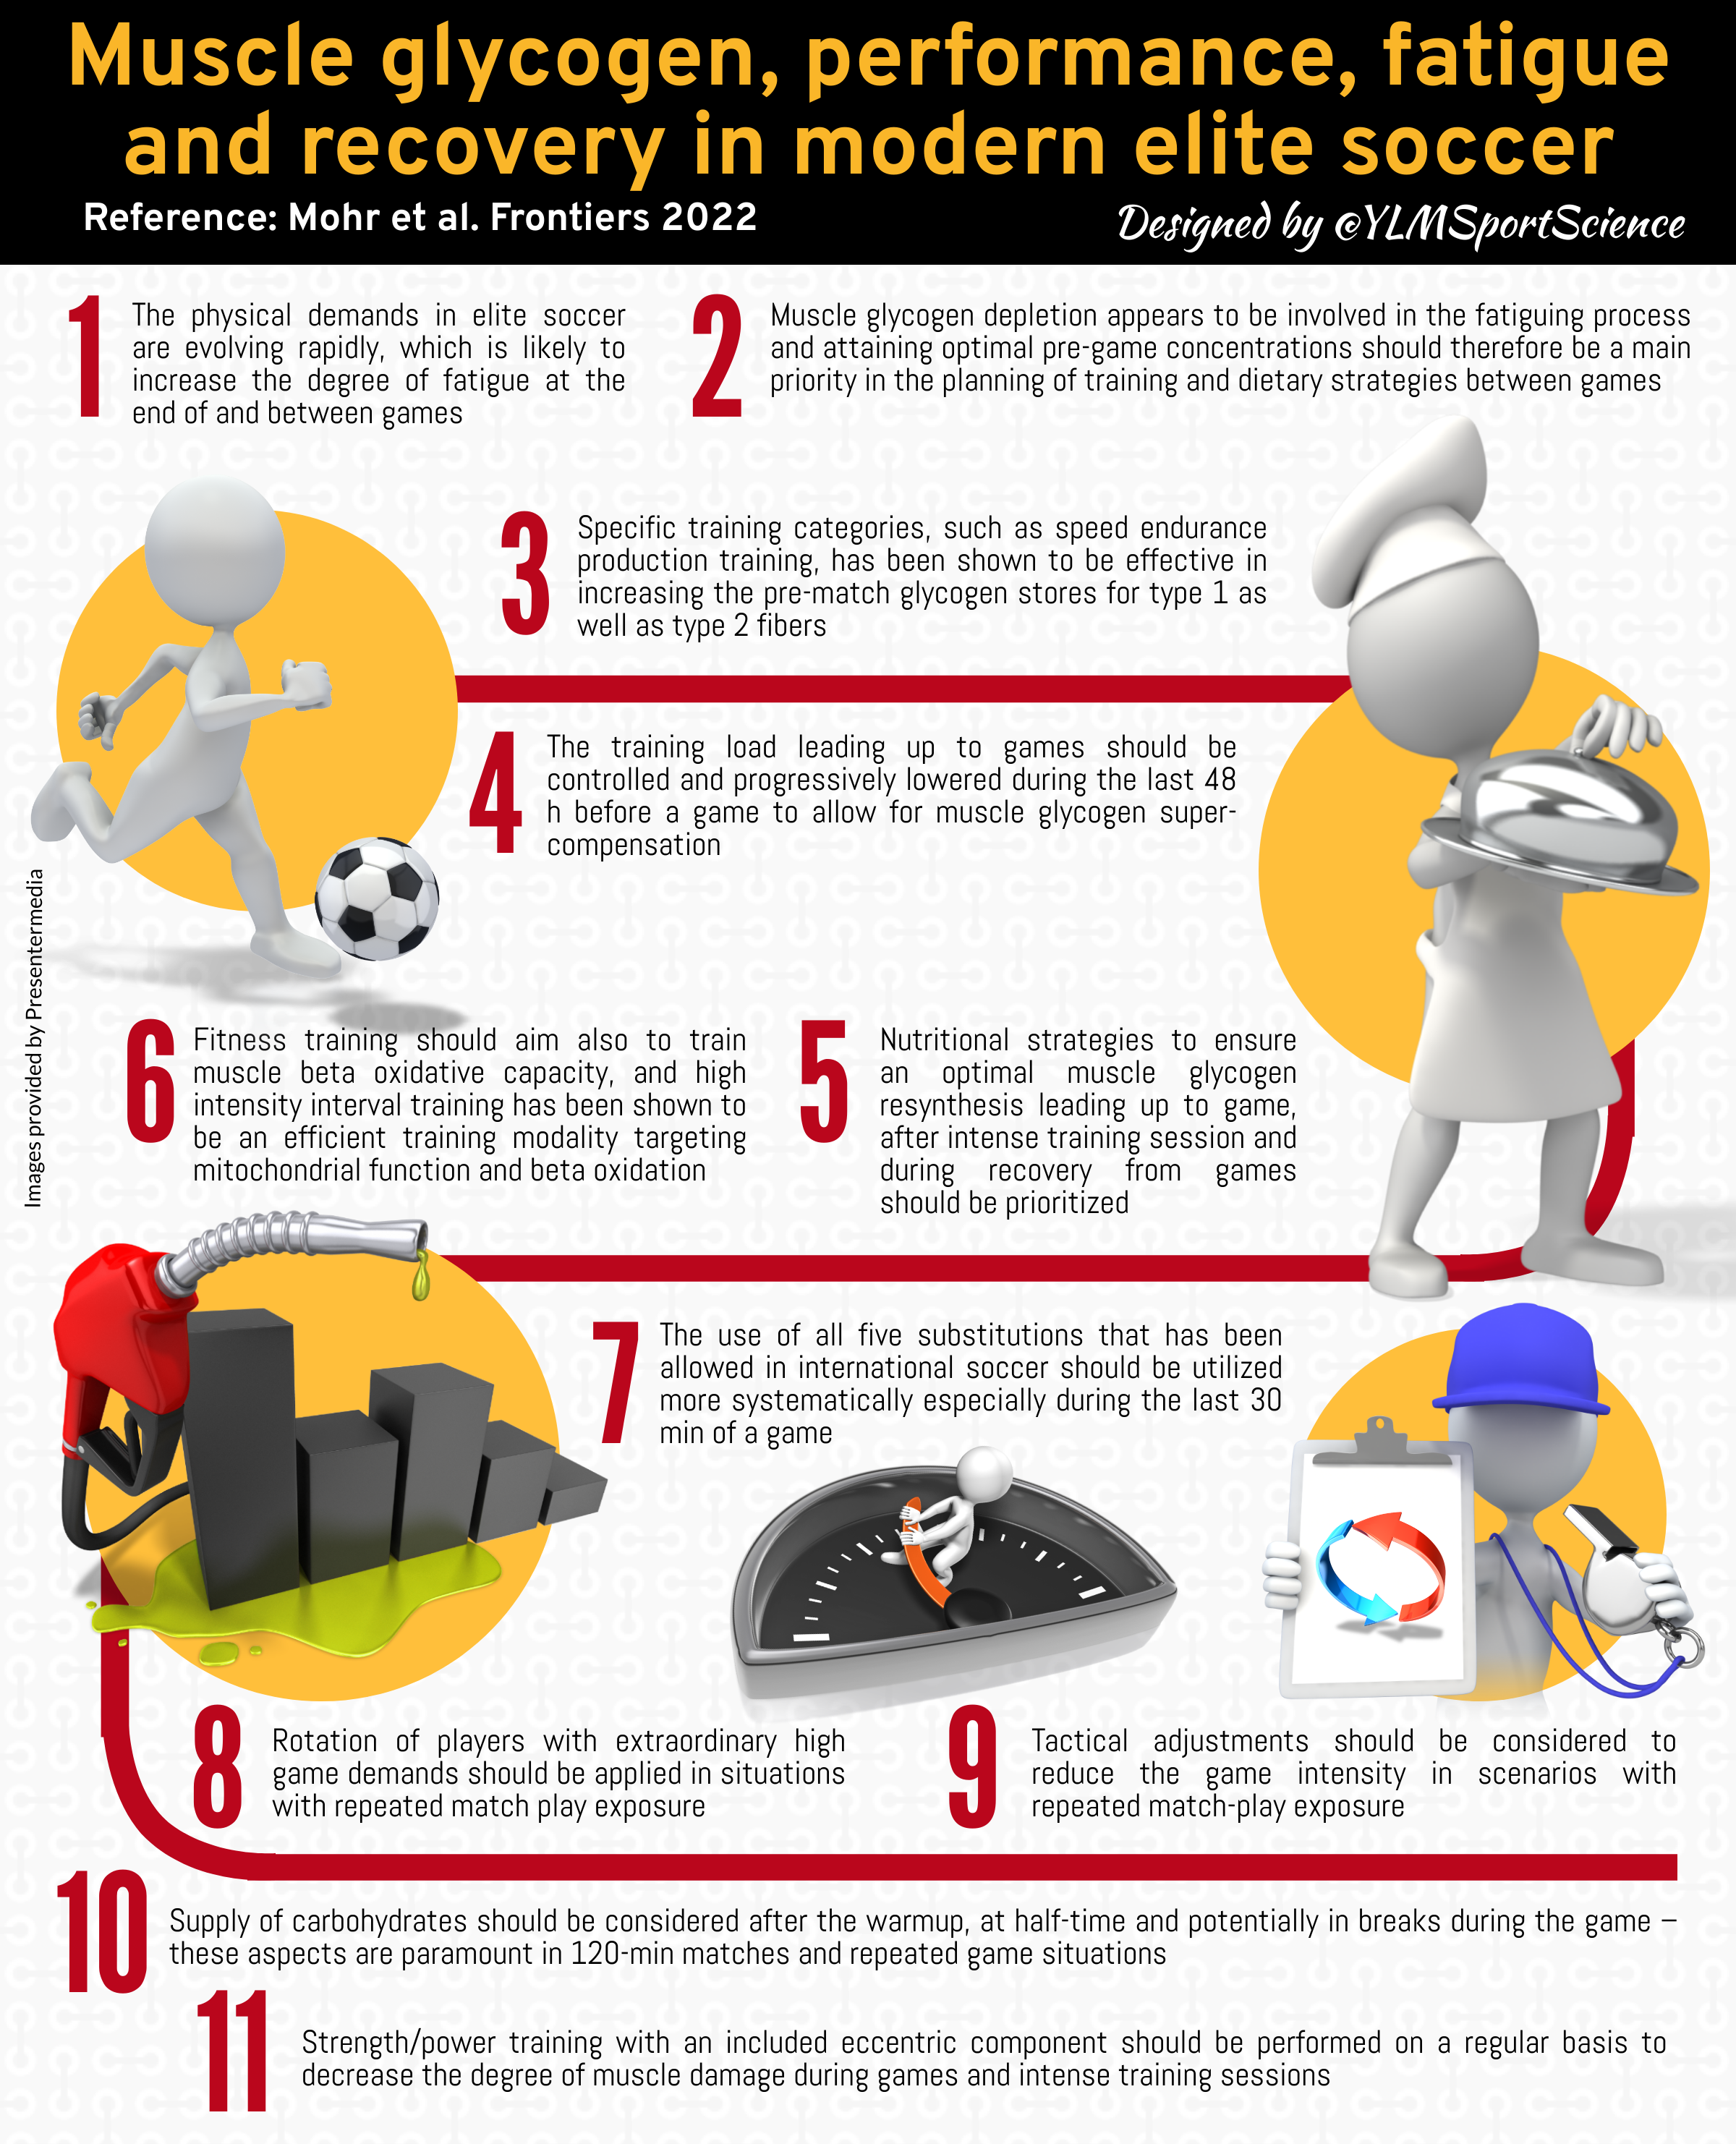 Muscle glycogen, performance, fatigue and recovery in modern elite soccer